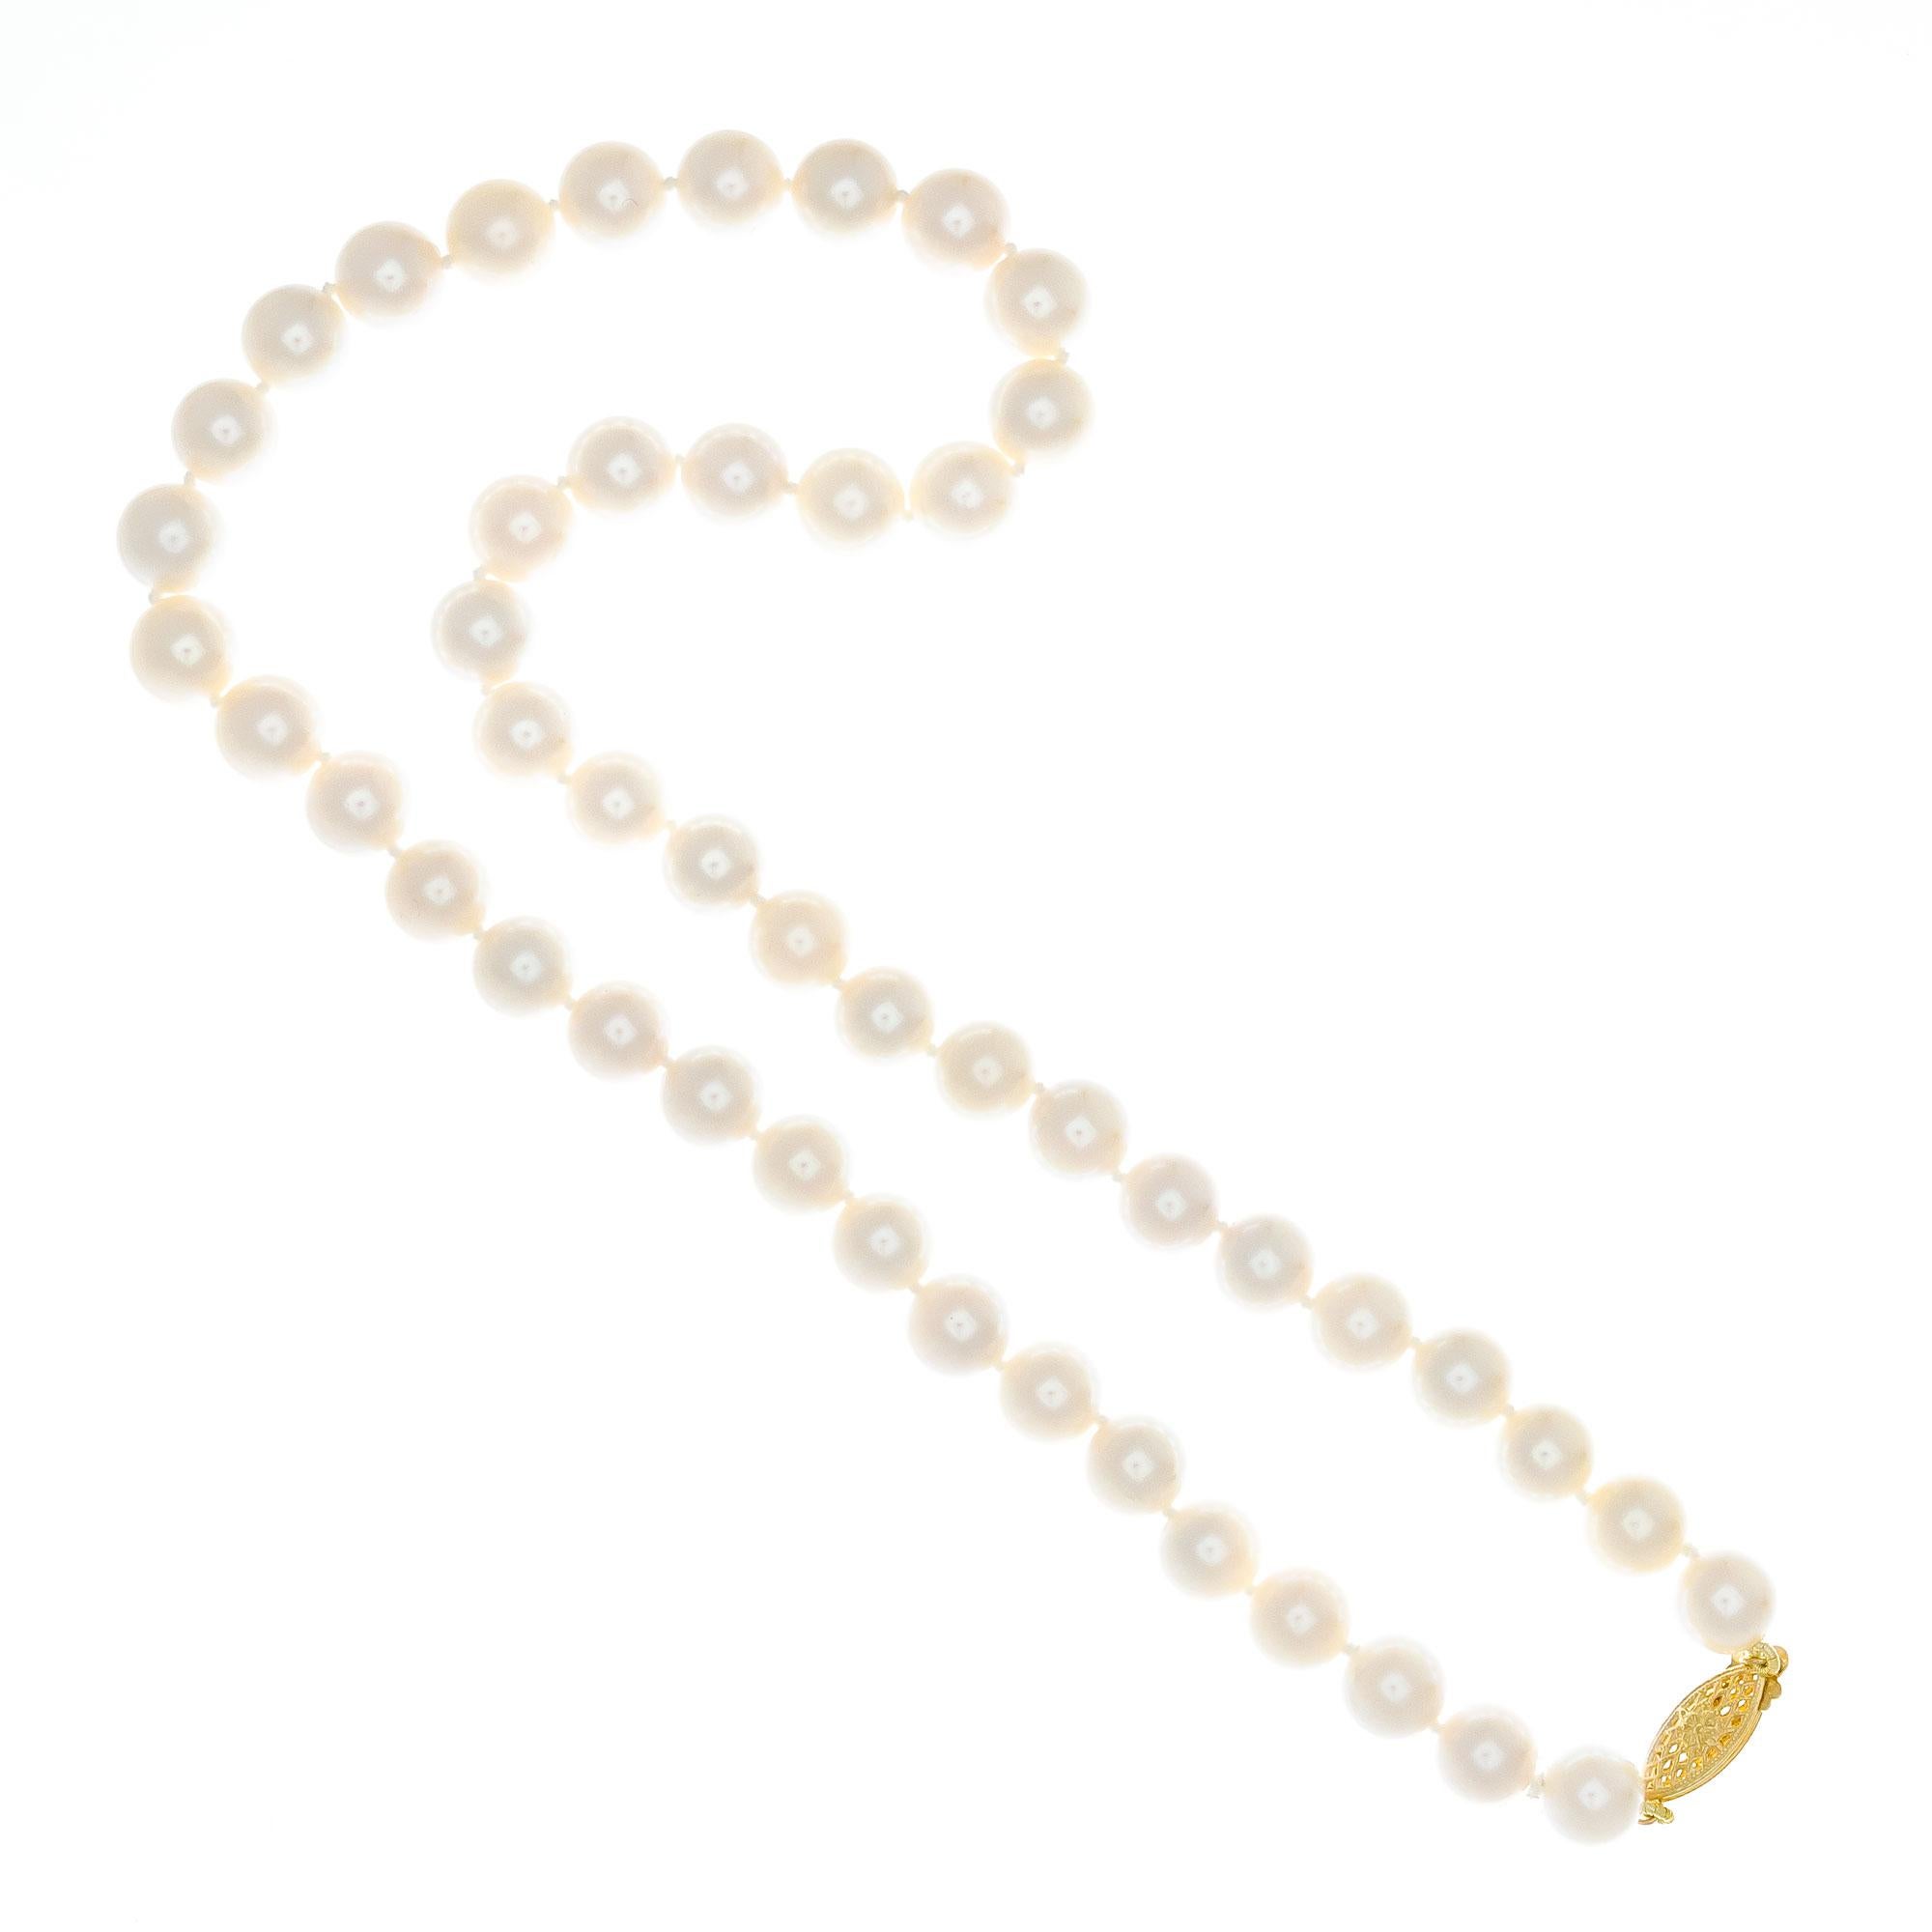 value of 50 year old pearl necklace